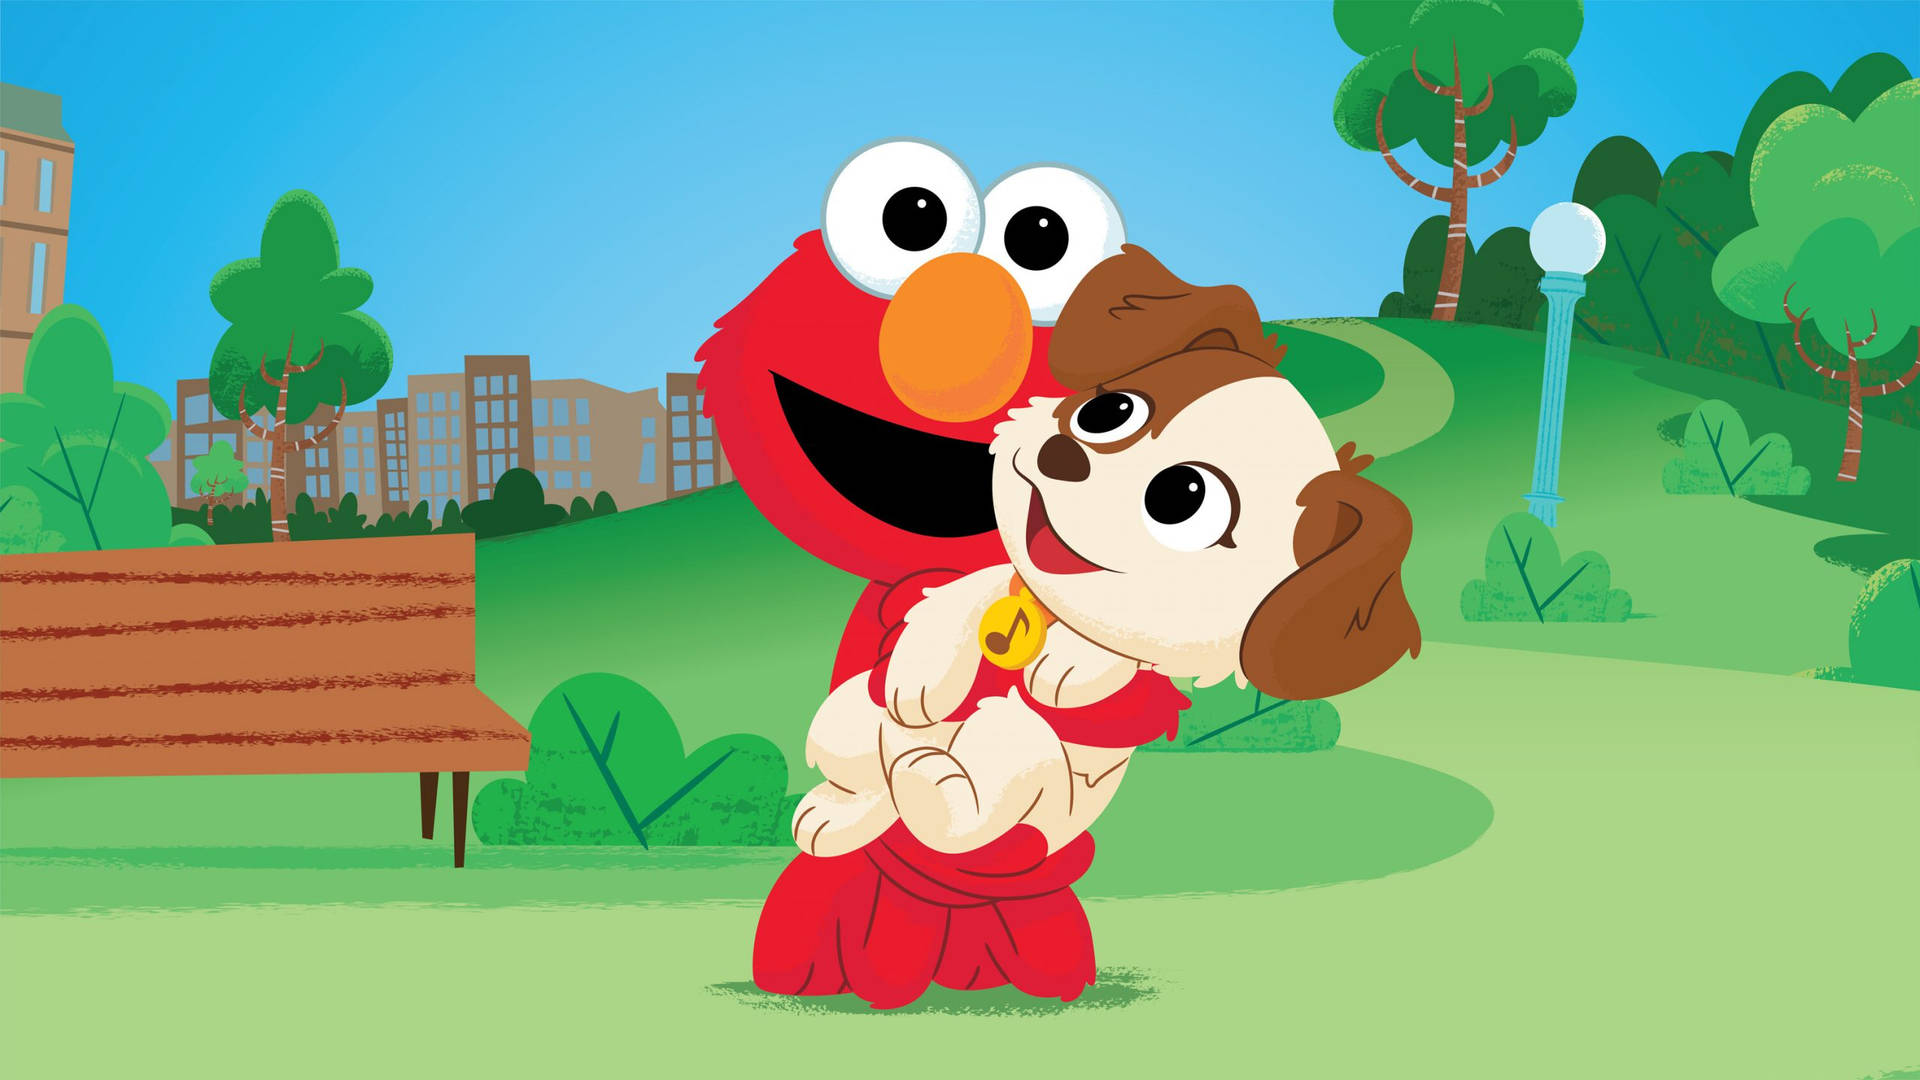 Elmo And His Pet In Park Background